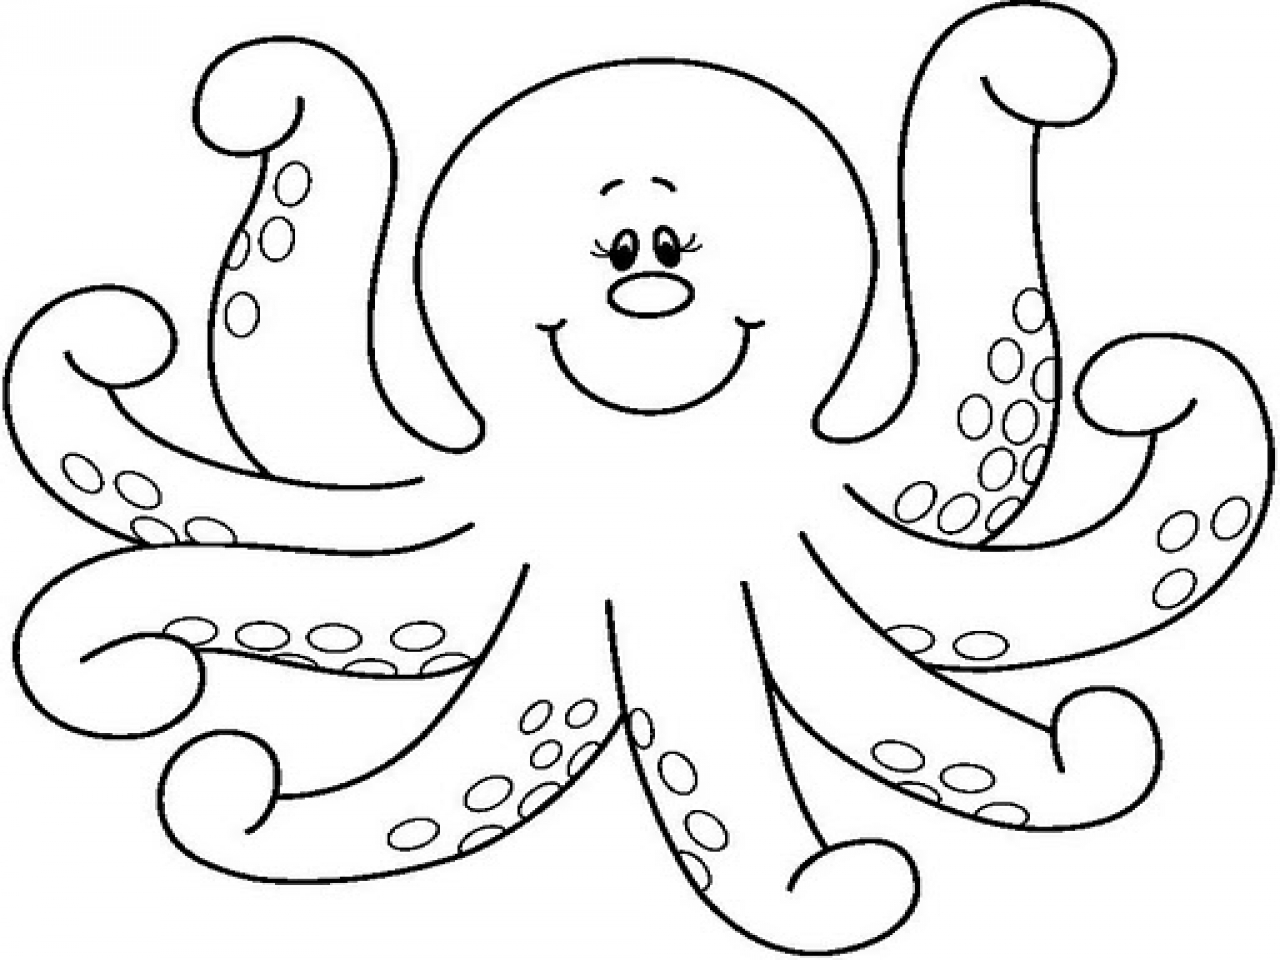 Black and White Octopus Tattoo Sleeve Designs - wide 8